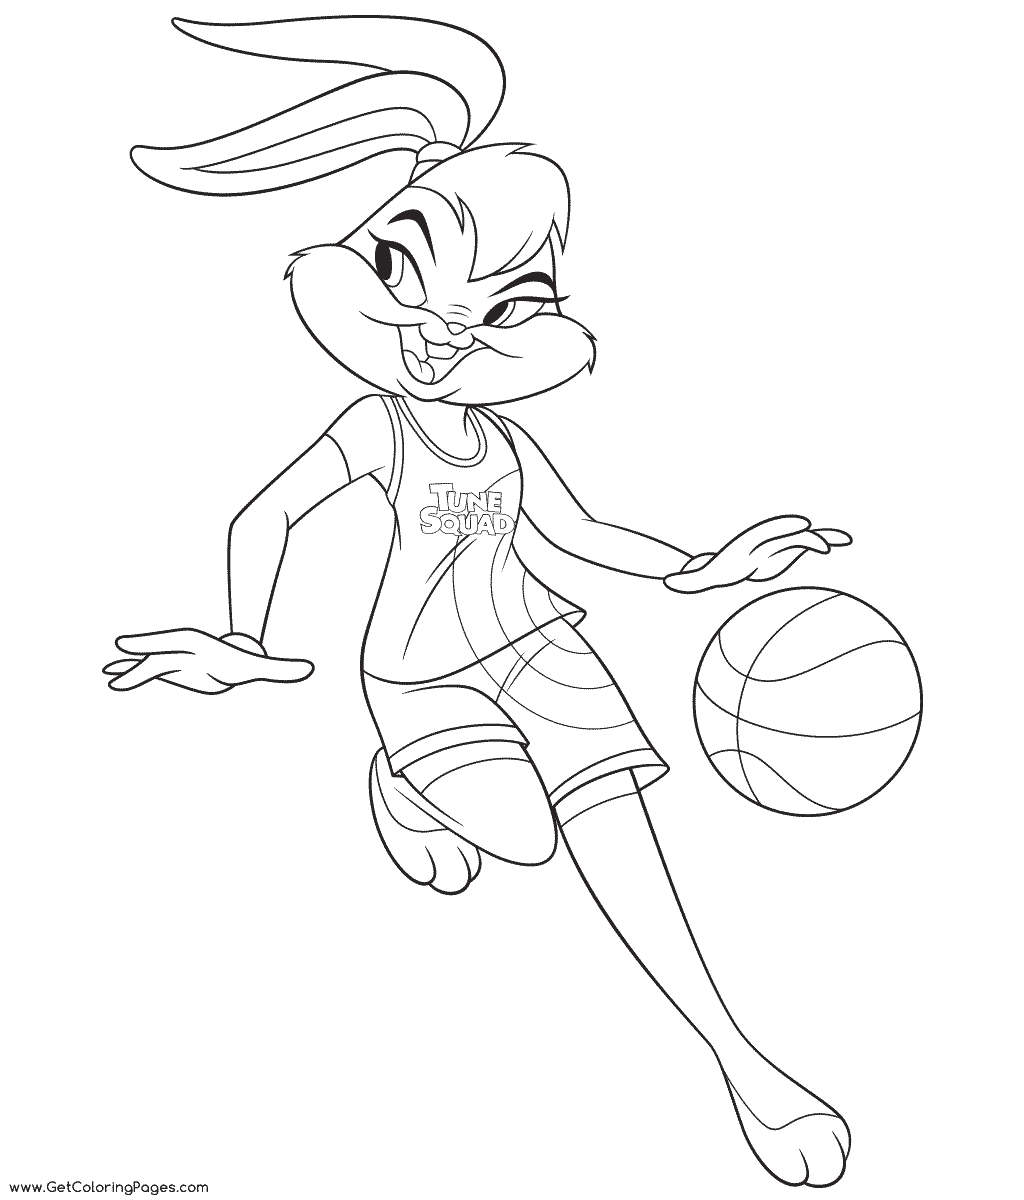 Lola Bunny Coloring Pages - Get Coloring Pages